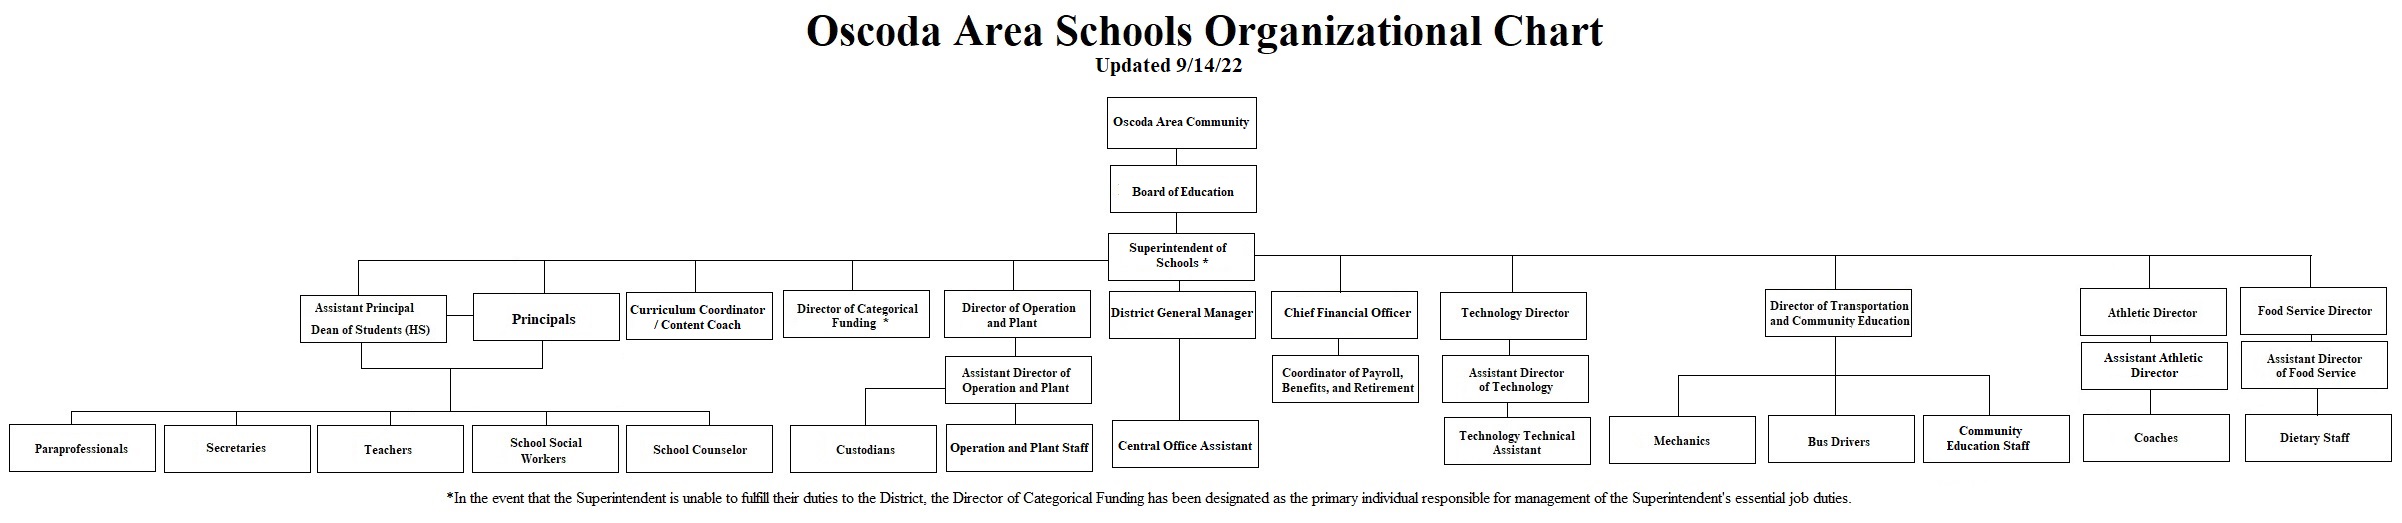 Human Resources and Payroll Oscoda Area Schools